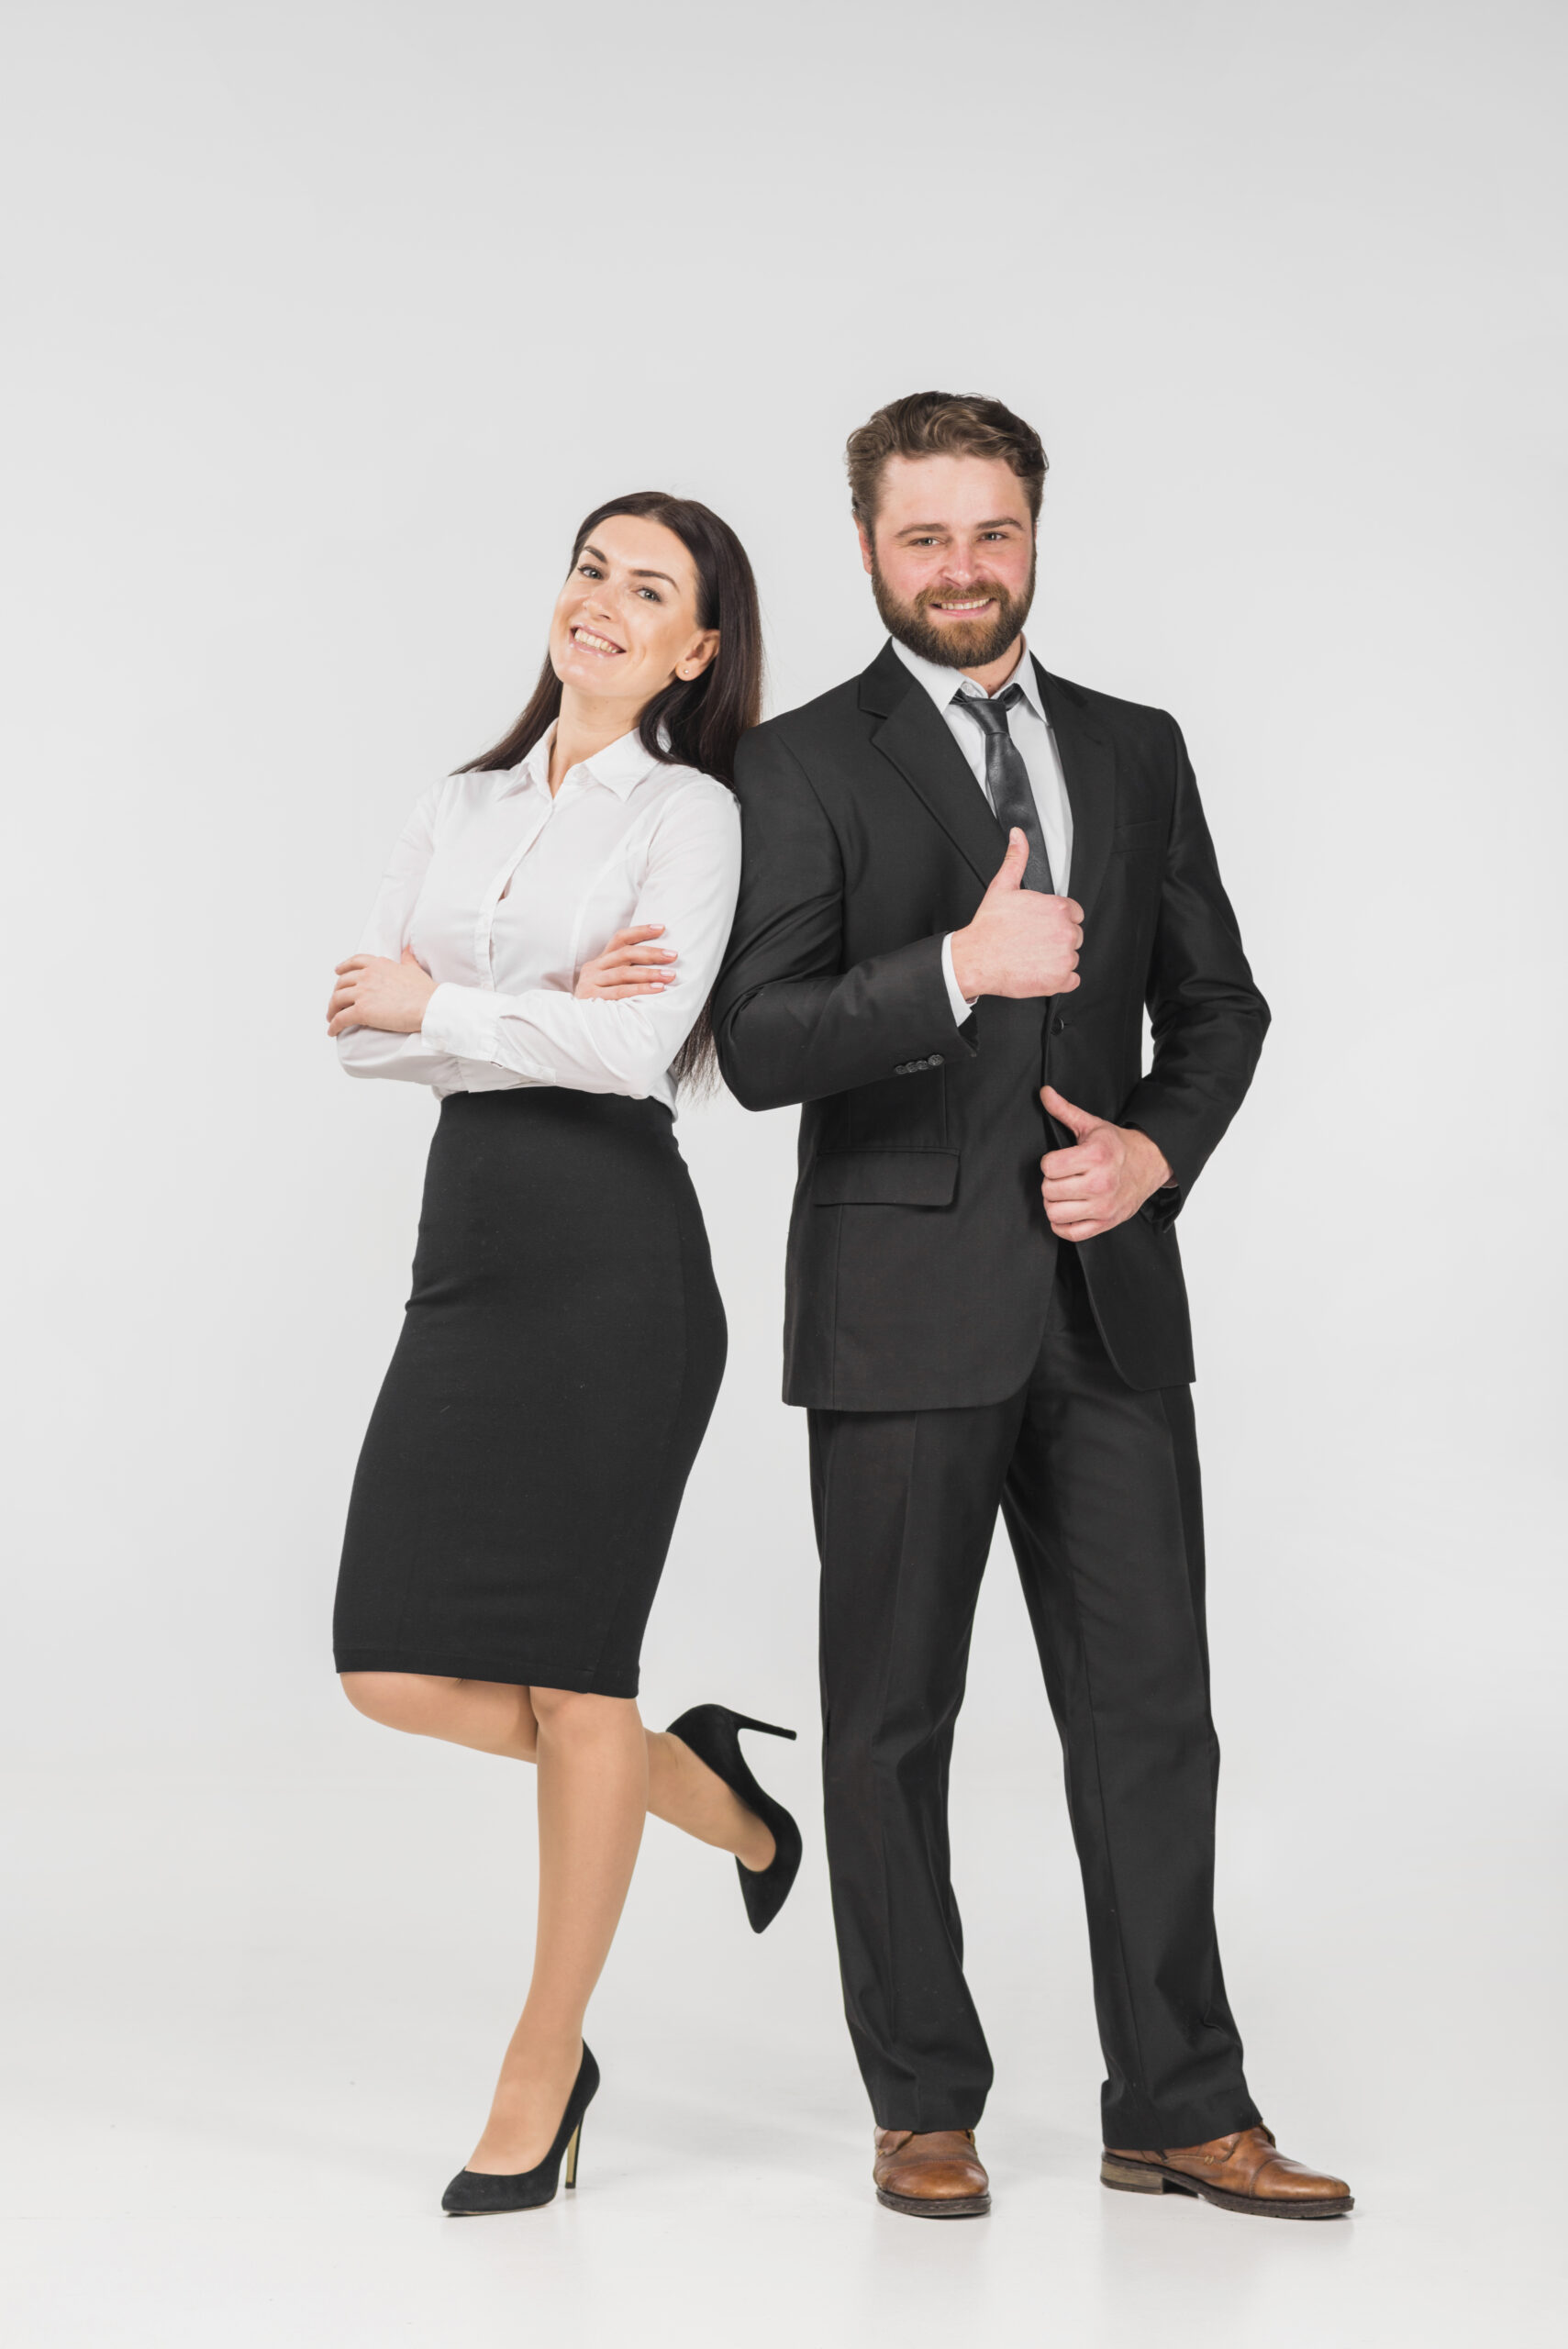 colleagues-man-and-woman-leaning-on-each-other-and-smiling